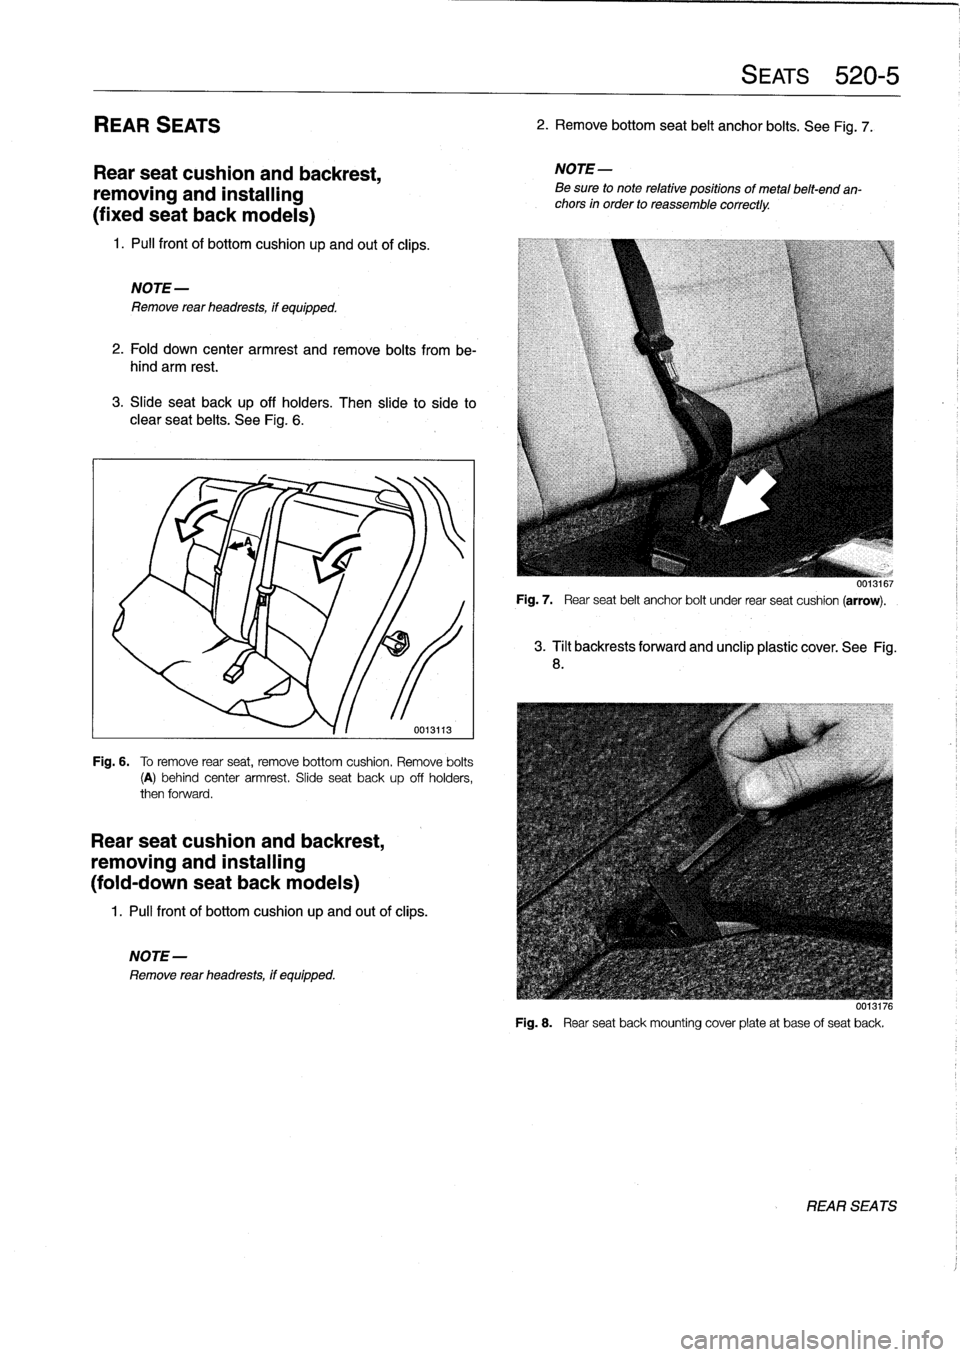 BMW 318i 1998 E36 Service Manual 
REAR
SEATS

Rear
seat
cushion
and
backrest,

removing
and
installing

(fixed
seat
back
modeis)

1
.
Pull
front
of
bottomcushion
up
and
out
of
clips
.

NOTE-

Remove
rear
headrests,
if
equipped
.

2
.